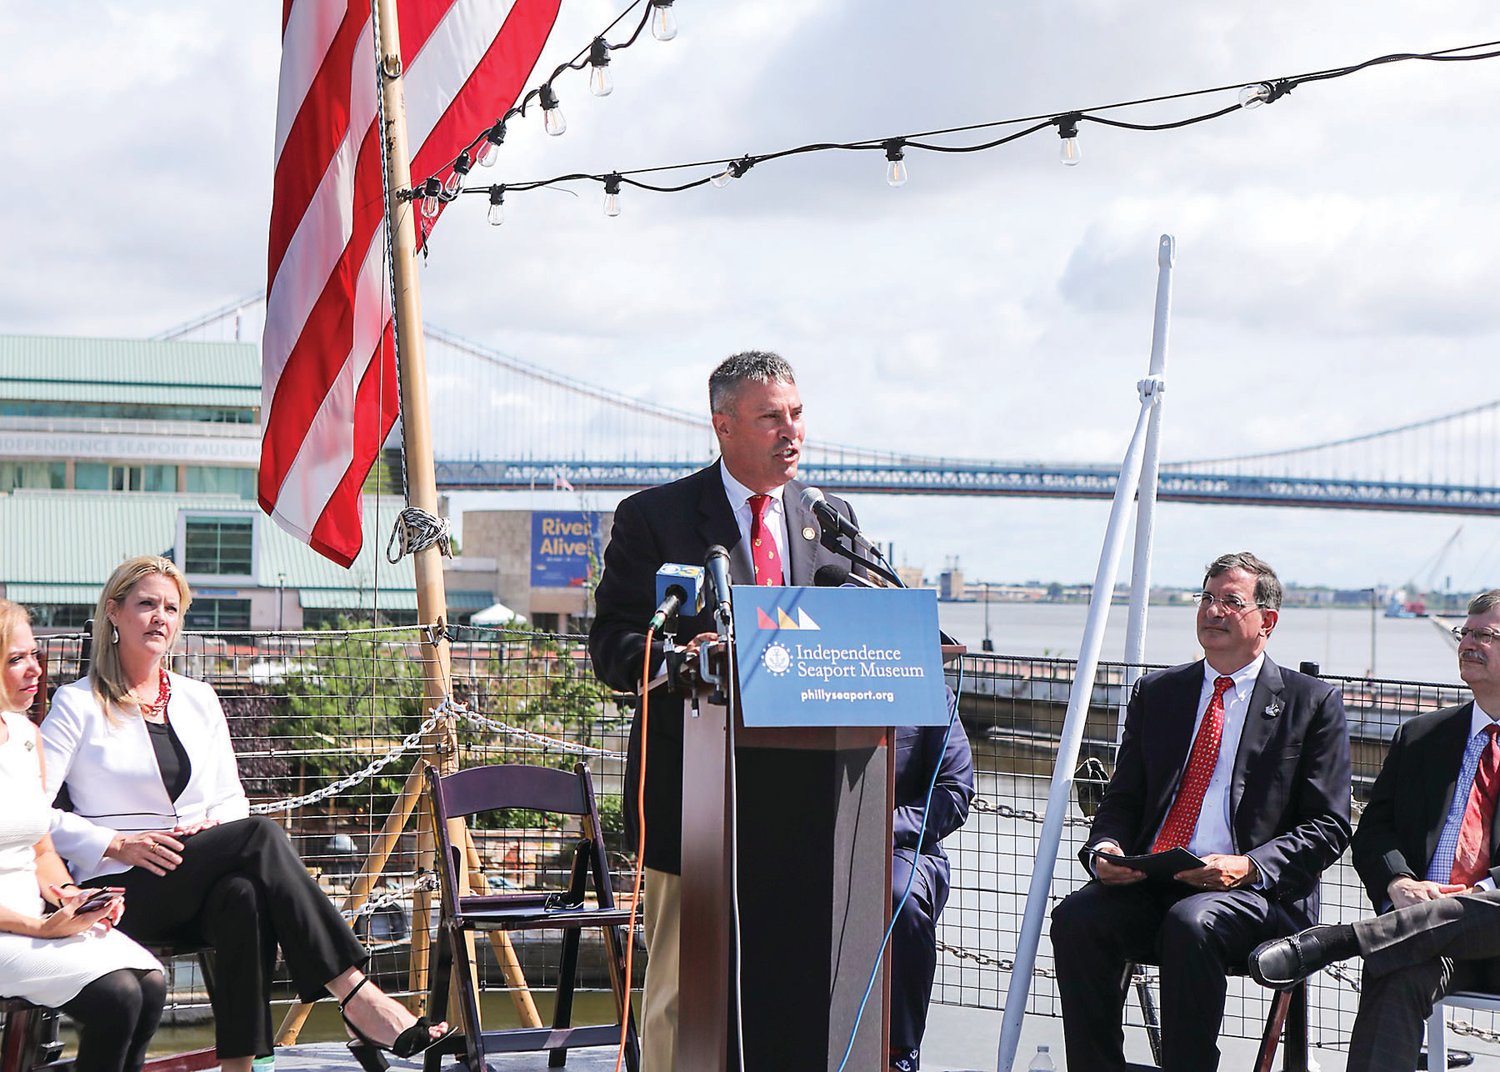 State Rep. Greg Rothman, (R-Cumberland) speaks July 9 aboard Cruiser Olympia docked at the Independence Seaport Museum in Philadelphia. Rothman and other state leaders highlighted the Philadelphia/Camden region as a potential site for the 250th birthday celebration of the U.S. Navy and Marine Corps in 2025.